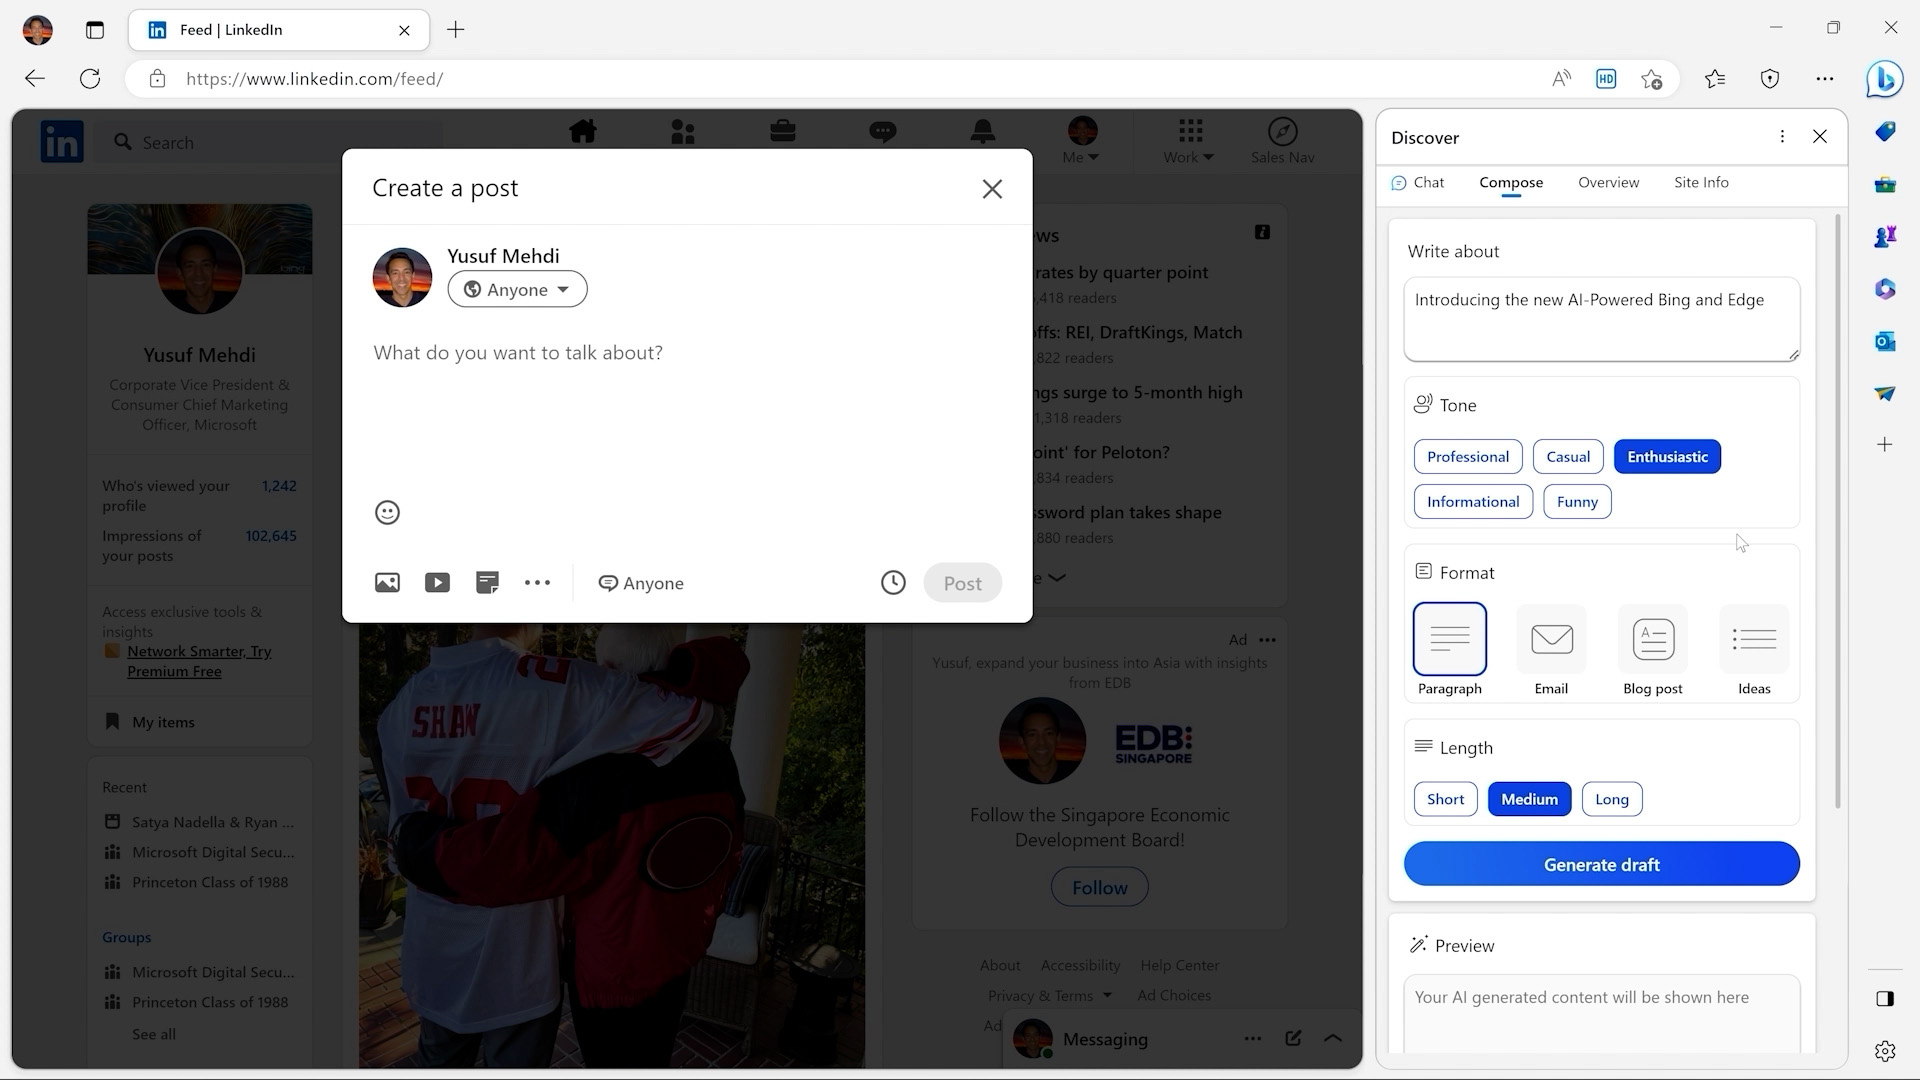 Microsoft's updated Edge browser has new AI capabilities, a new look and two new functionalities: chat and compose. You can also ask Edge to help you compose content, such as a LinkedIn post.